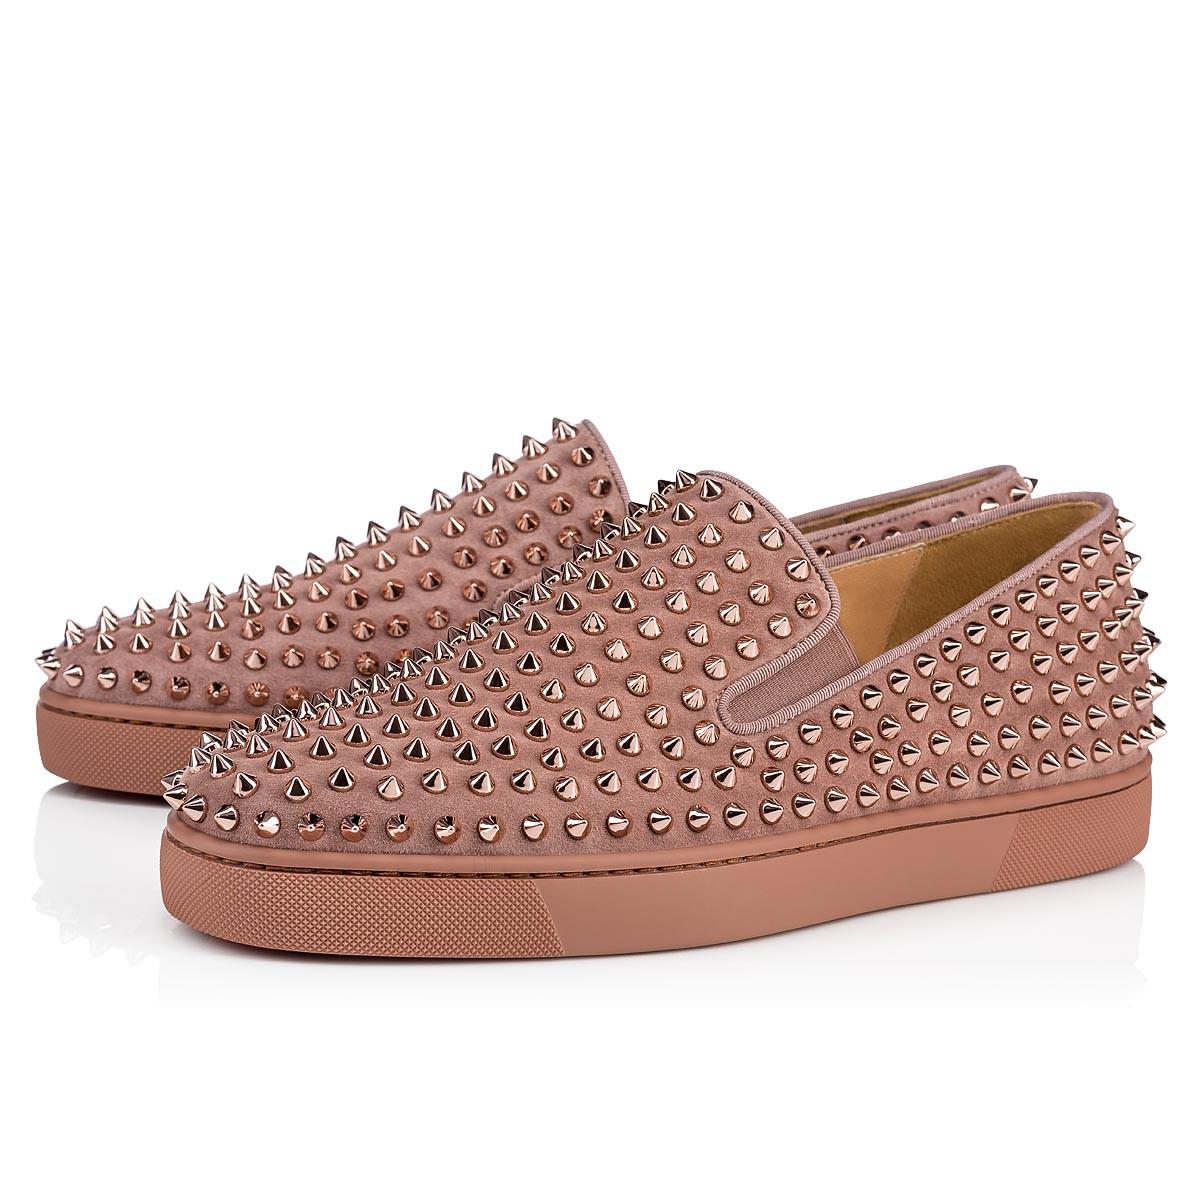 Christian Louboutin Roller-boat In Antic/pink Bronze | ModeSens